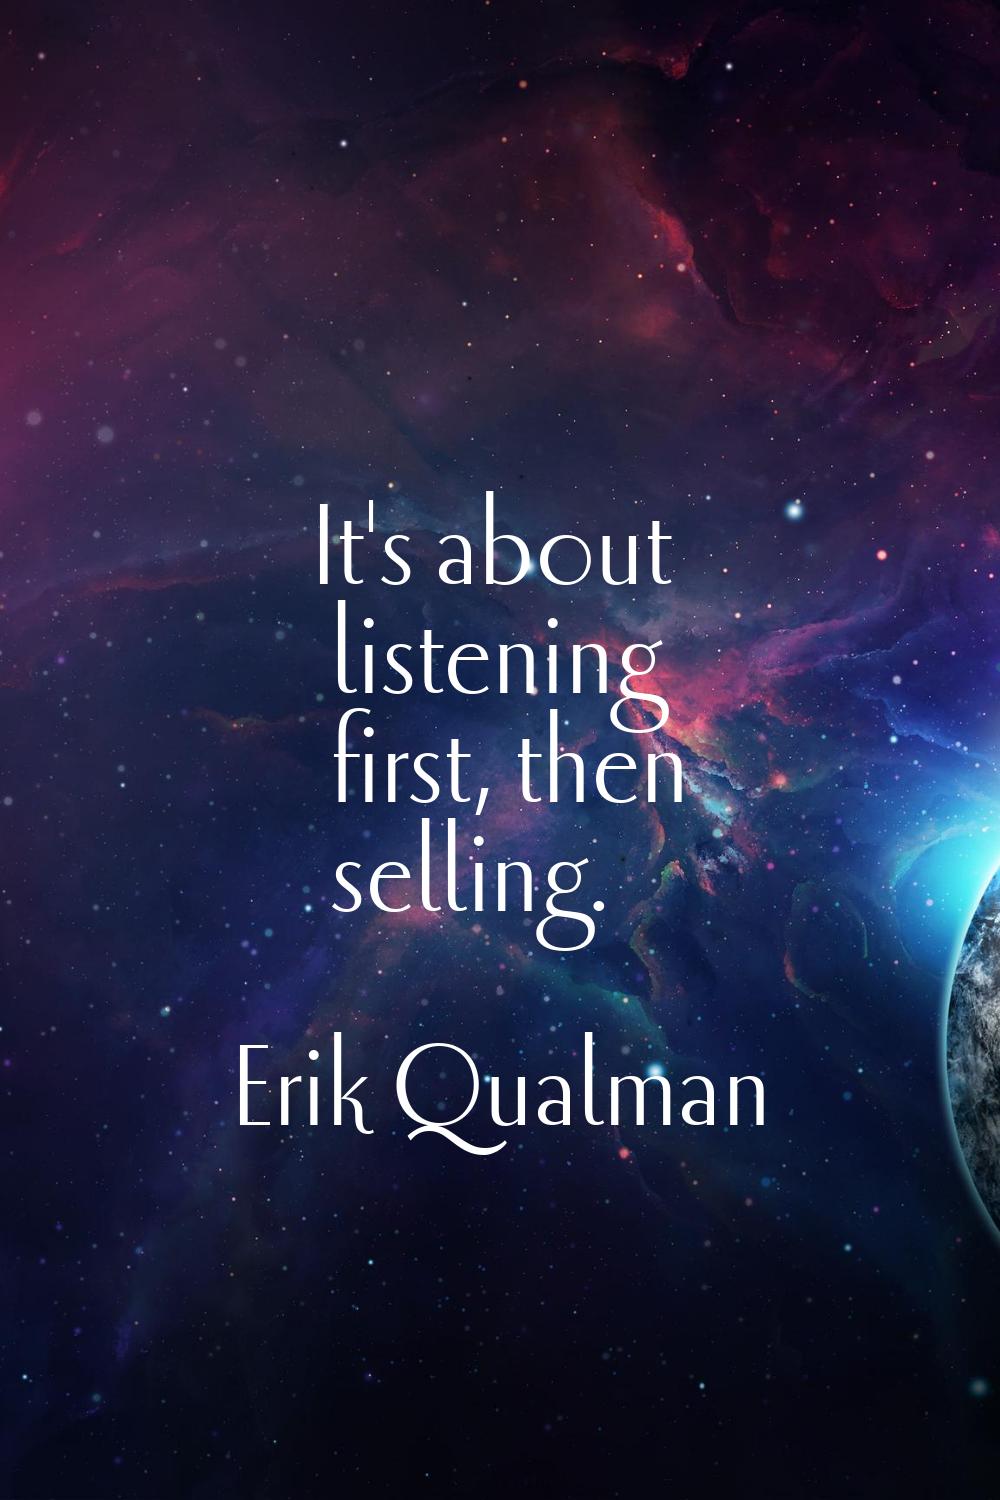 It's about listening first, then selling.